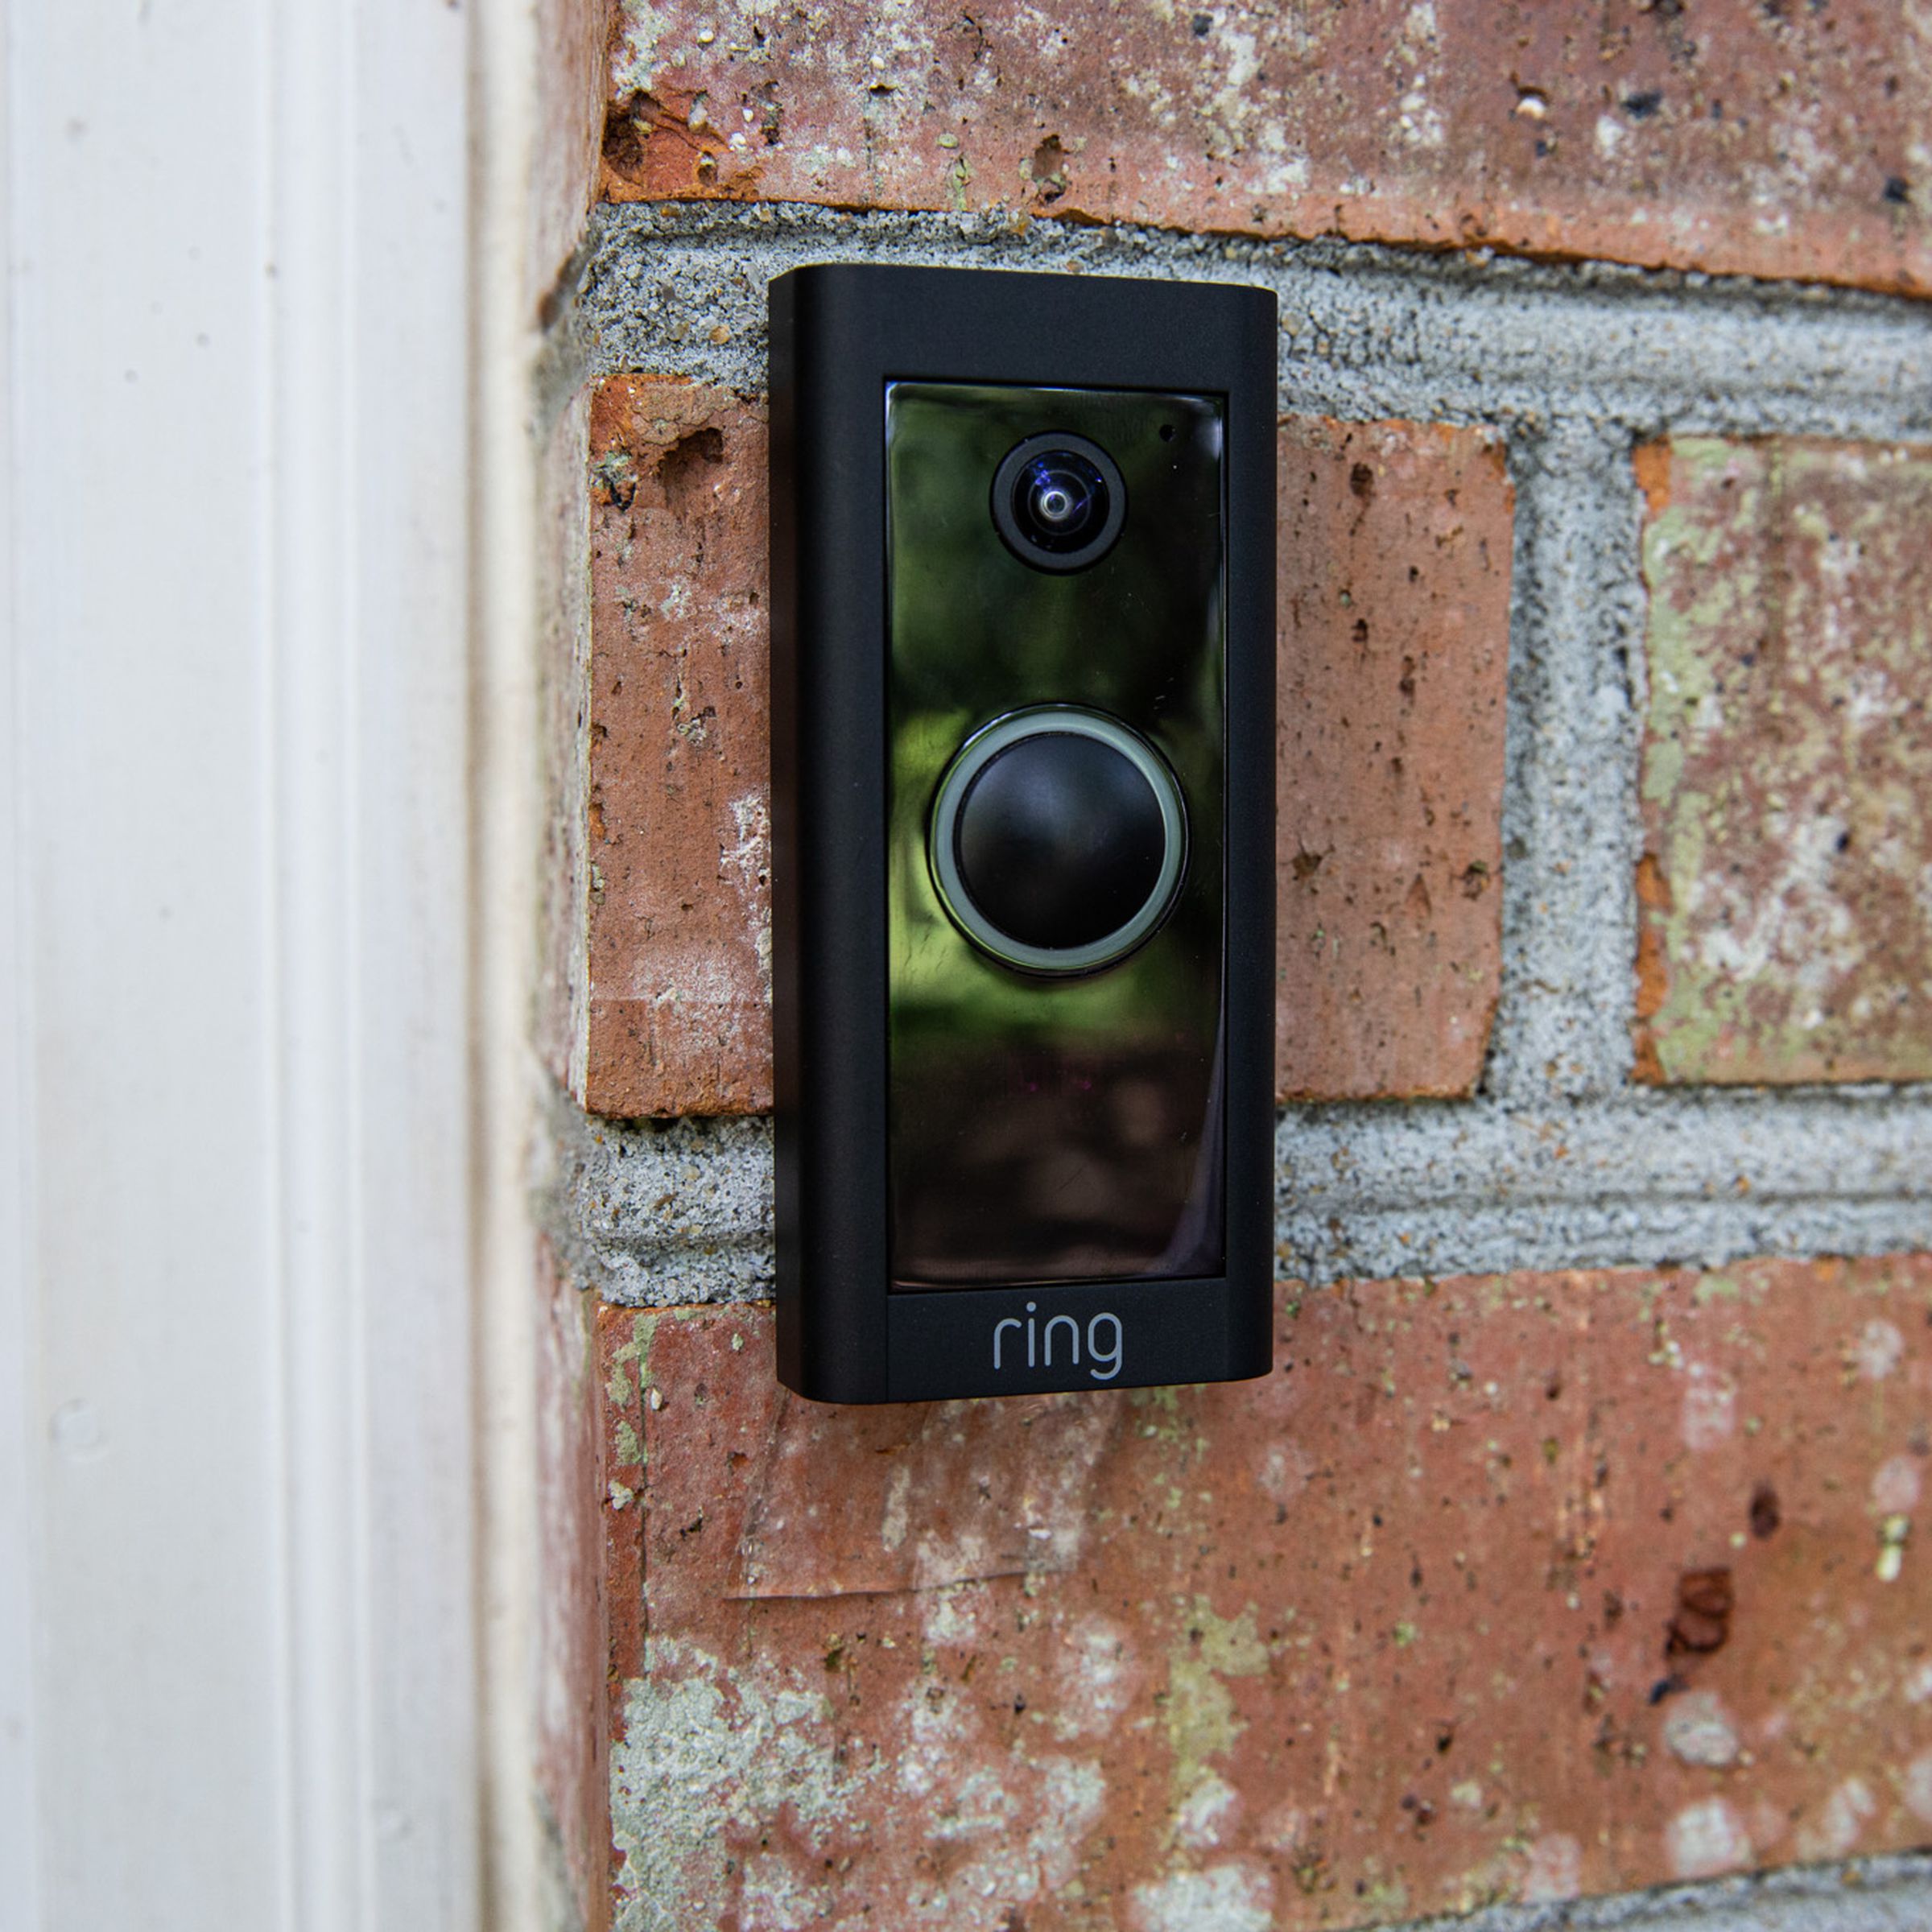 An image showing a Ring doorbell on a house